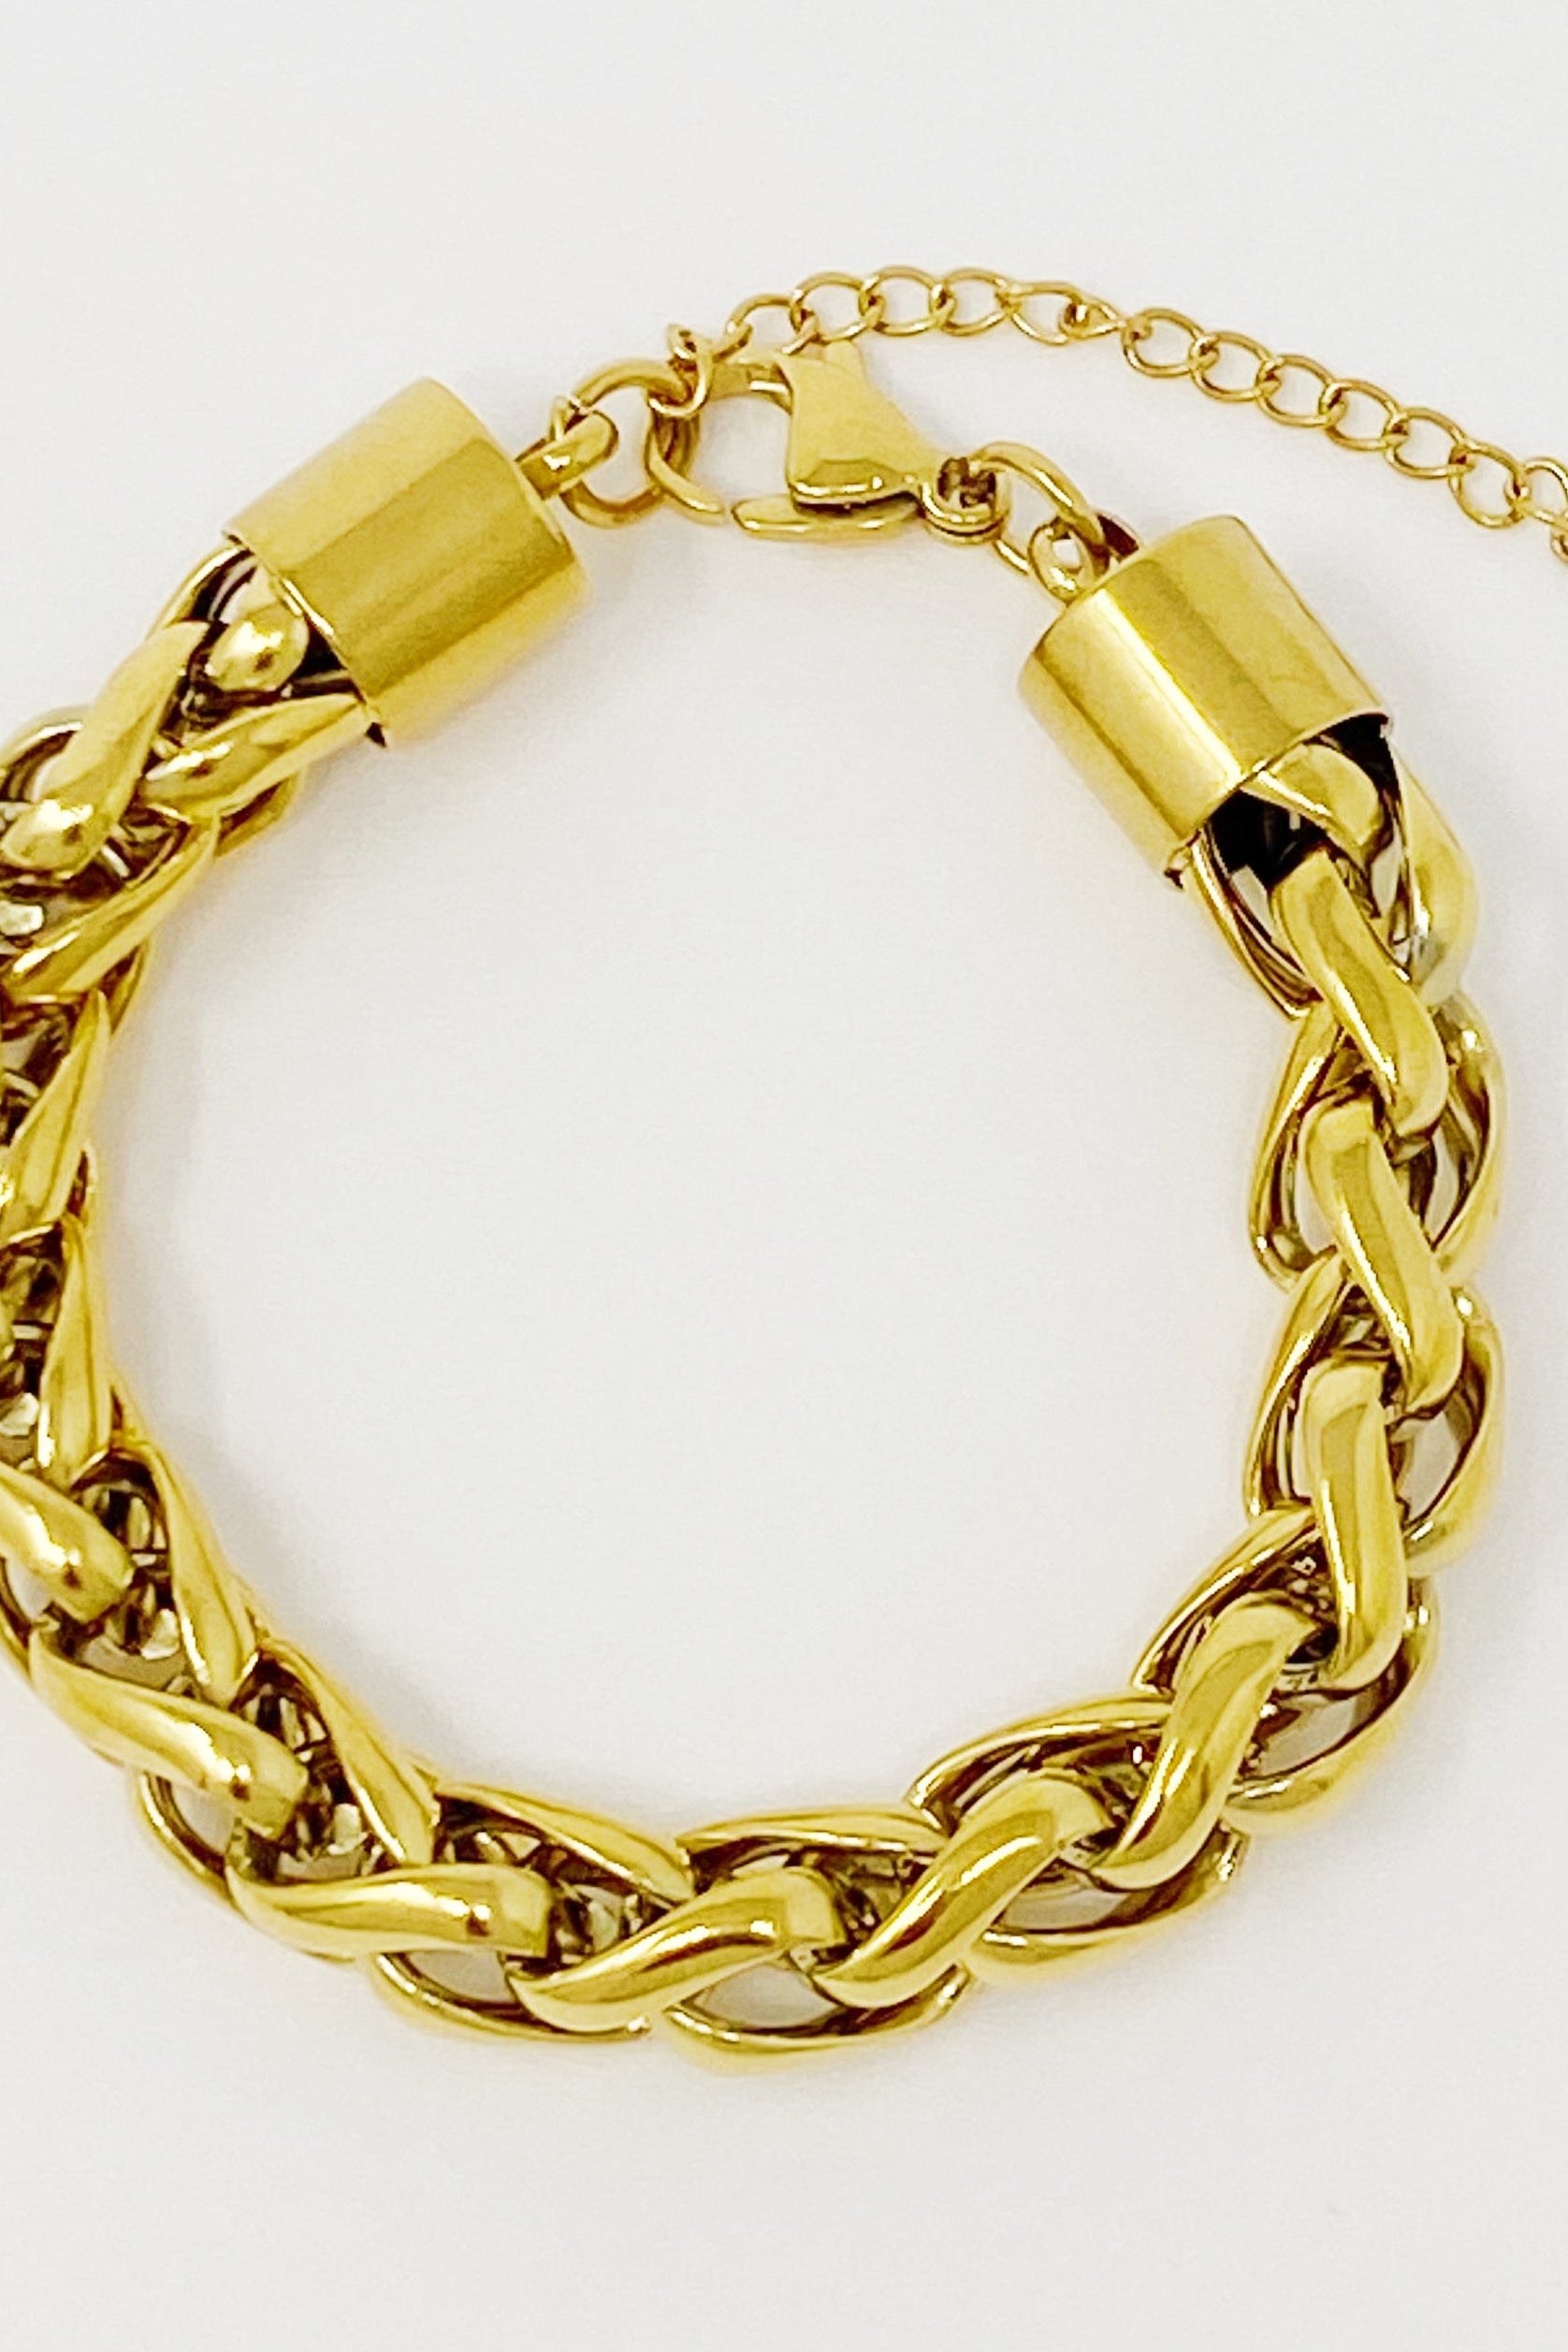 Bold And Edgy Chain Bracelet Ellisonyoung.com